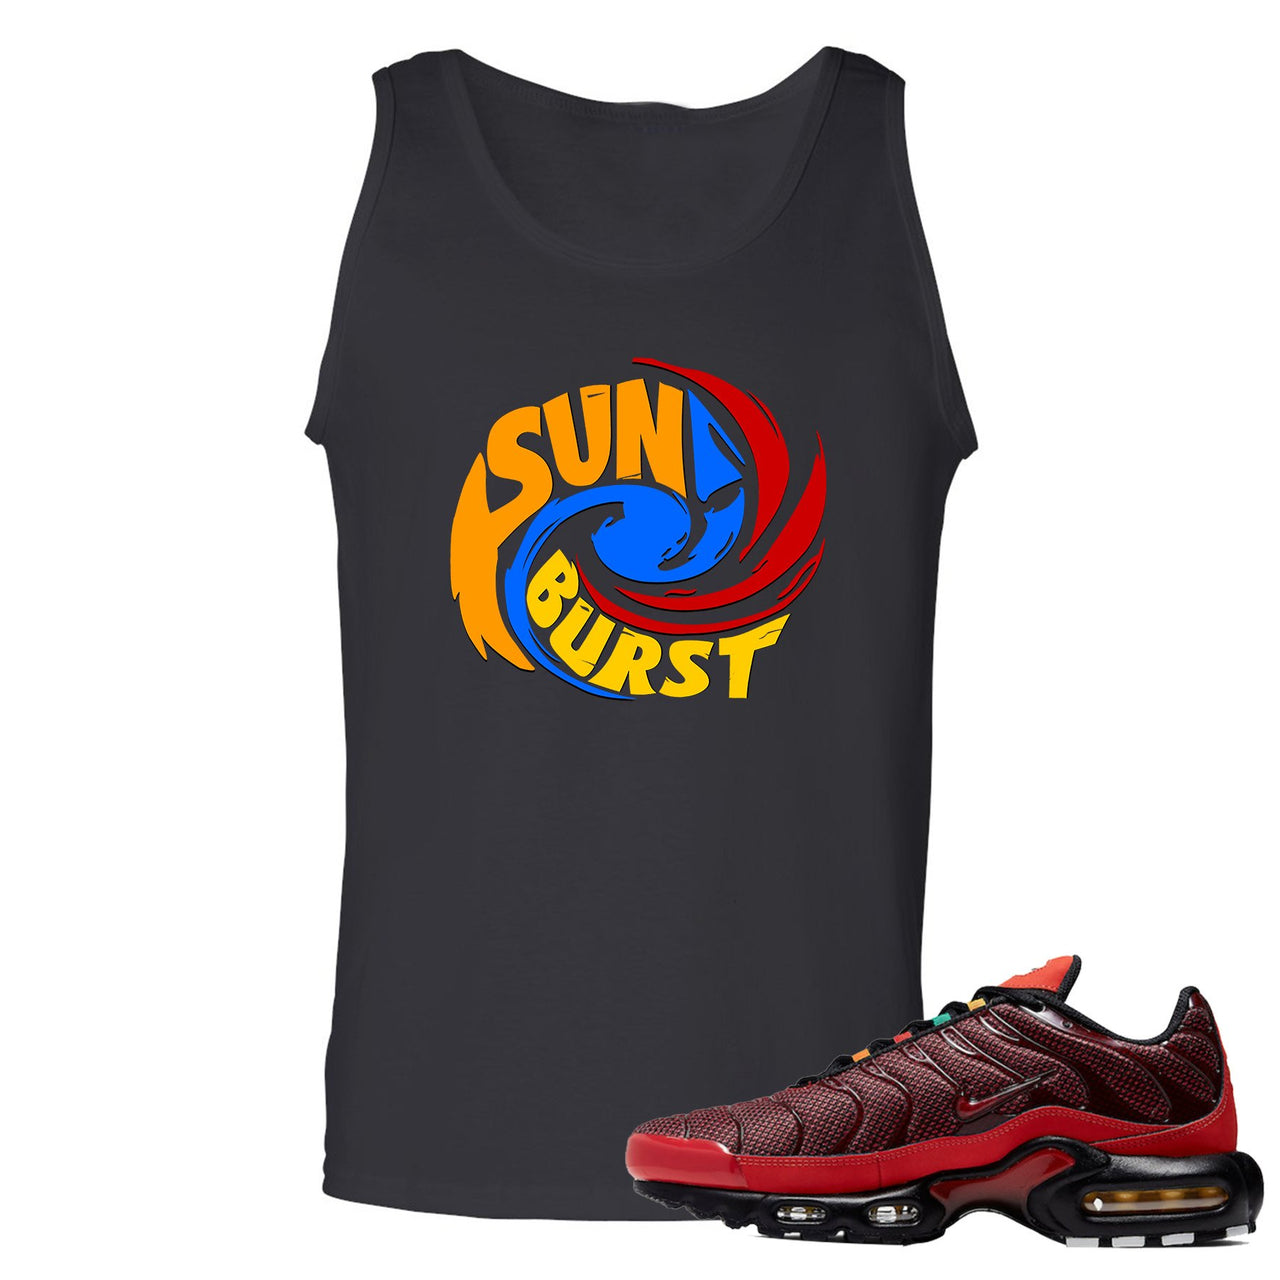 printed on the front of the air max plus sunburst sneaker matching black tank top is the sunburst hurricane